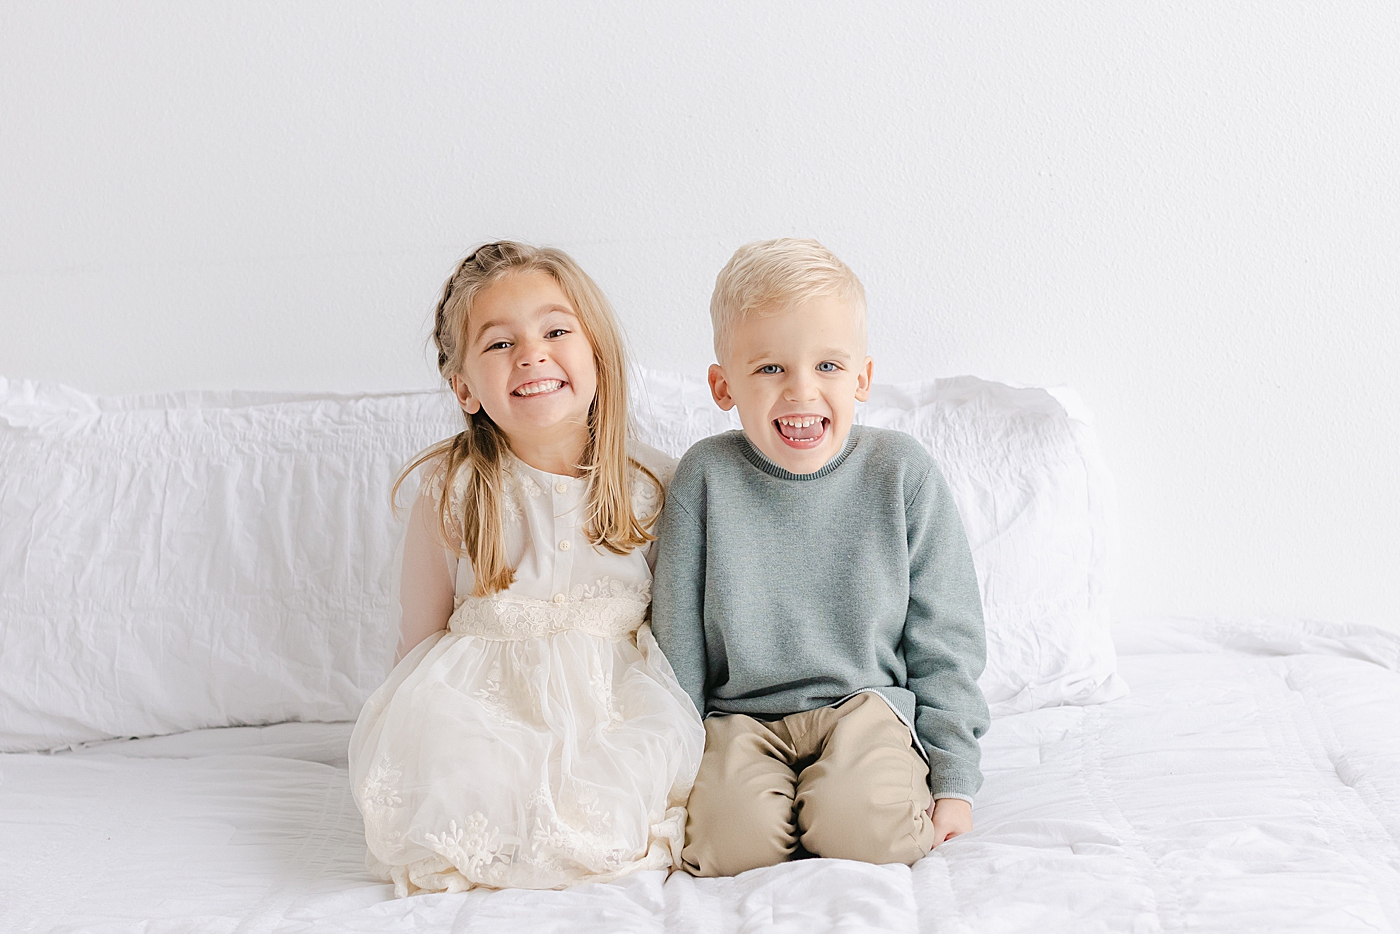 Brother and sister giggling sitting on a bed | Photo by Sana Ahmed Photography